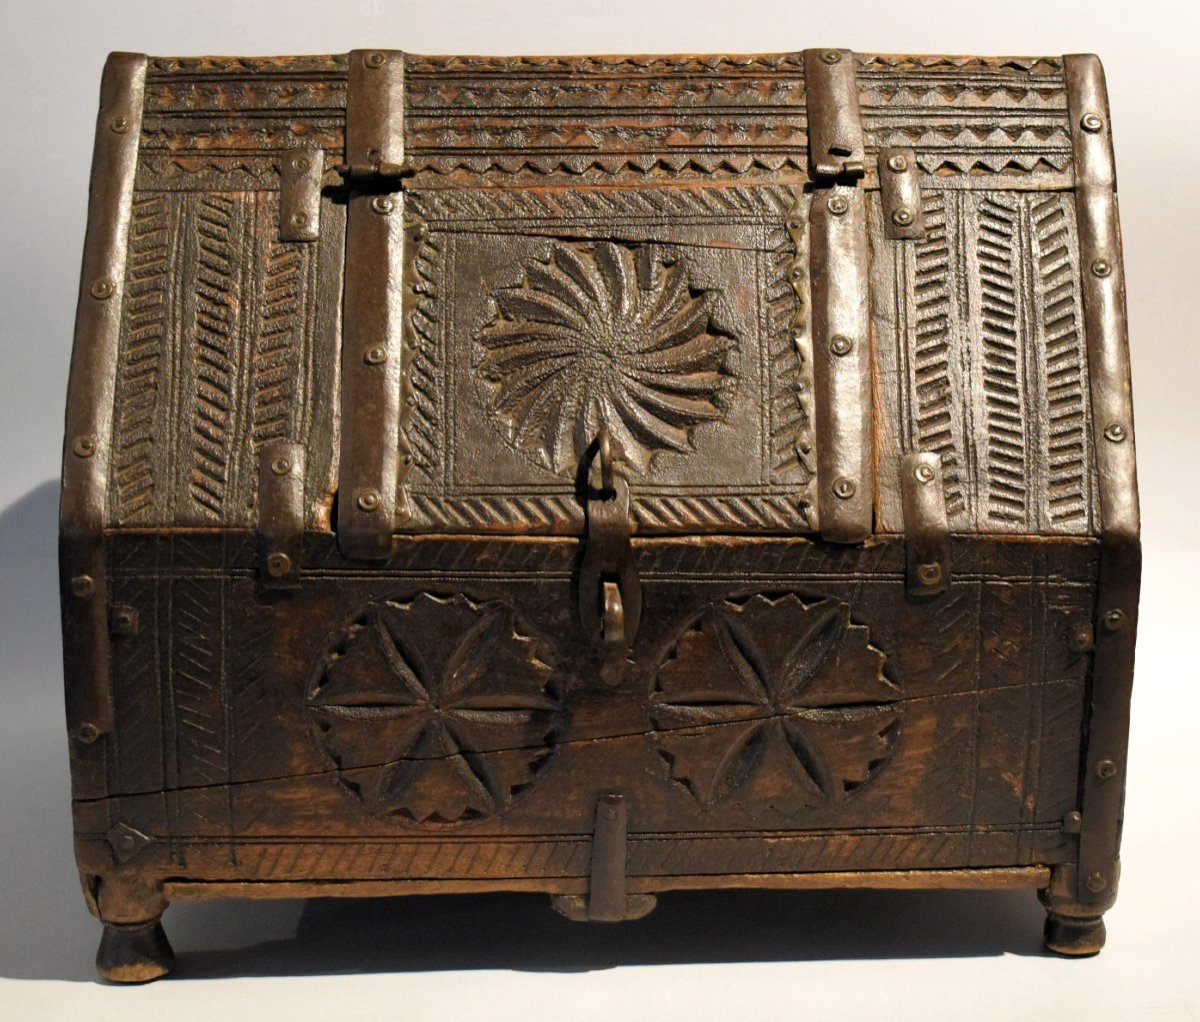 Ancient Mughal Jewelery Chest - India, Rajasthan 18th Century-photo-2